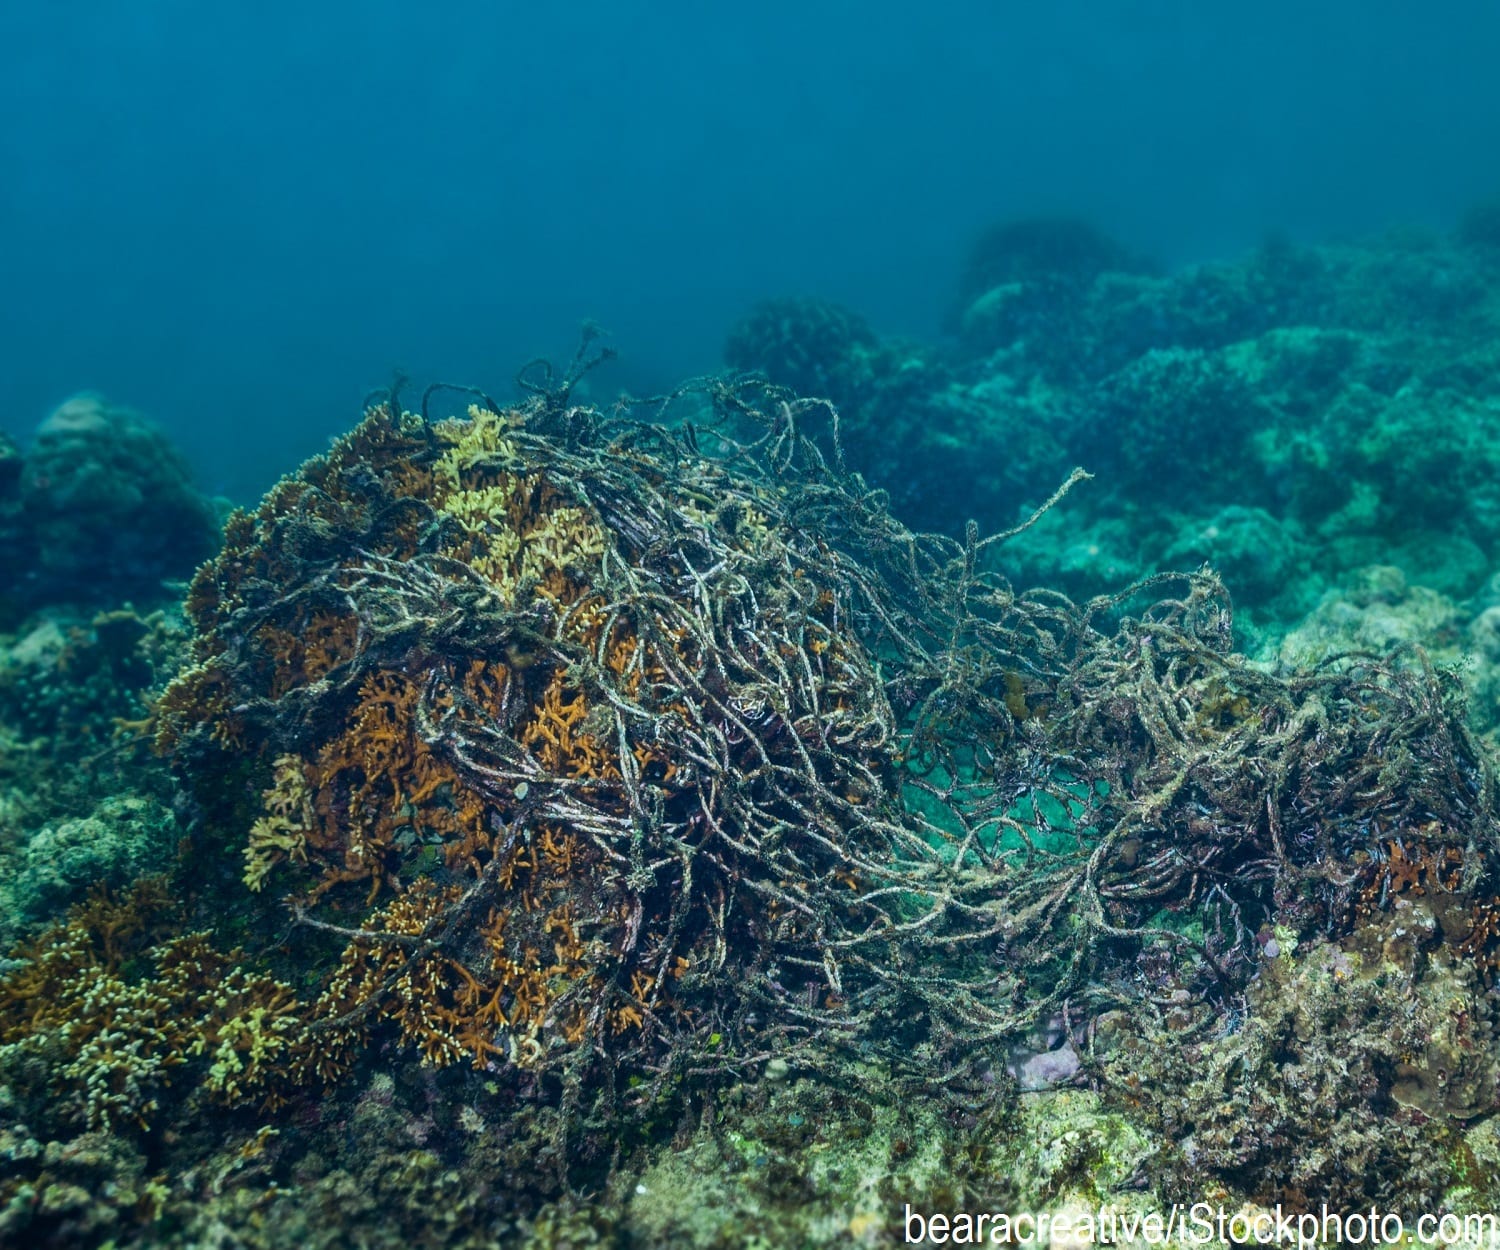 A fishing net caught on ocean reefs at the bottom of the ocean near the Danguan Island in the Philippines.